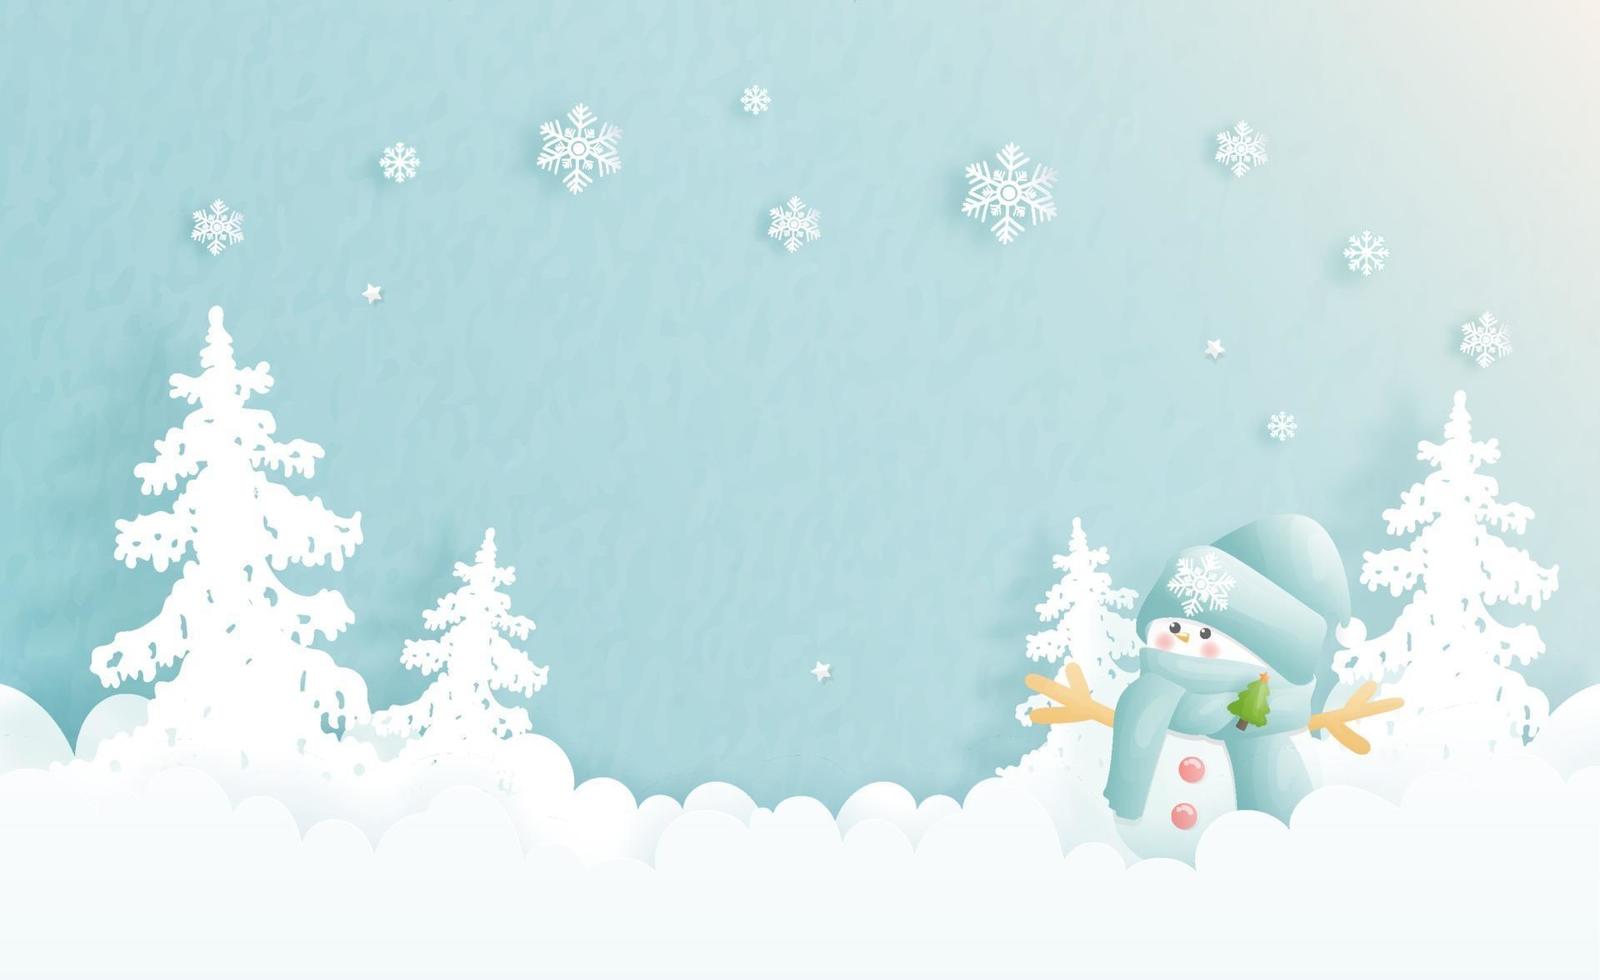 Christmas card, celebrations with cute snowman and Christmas scene vector